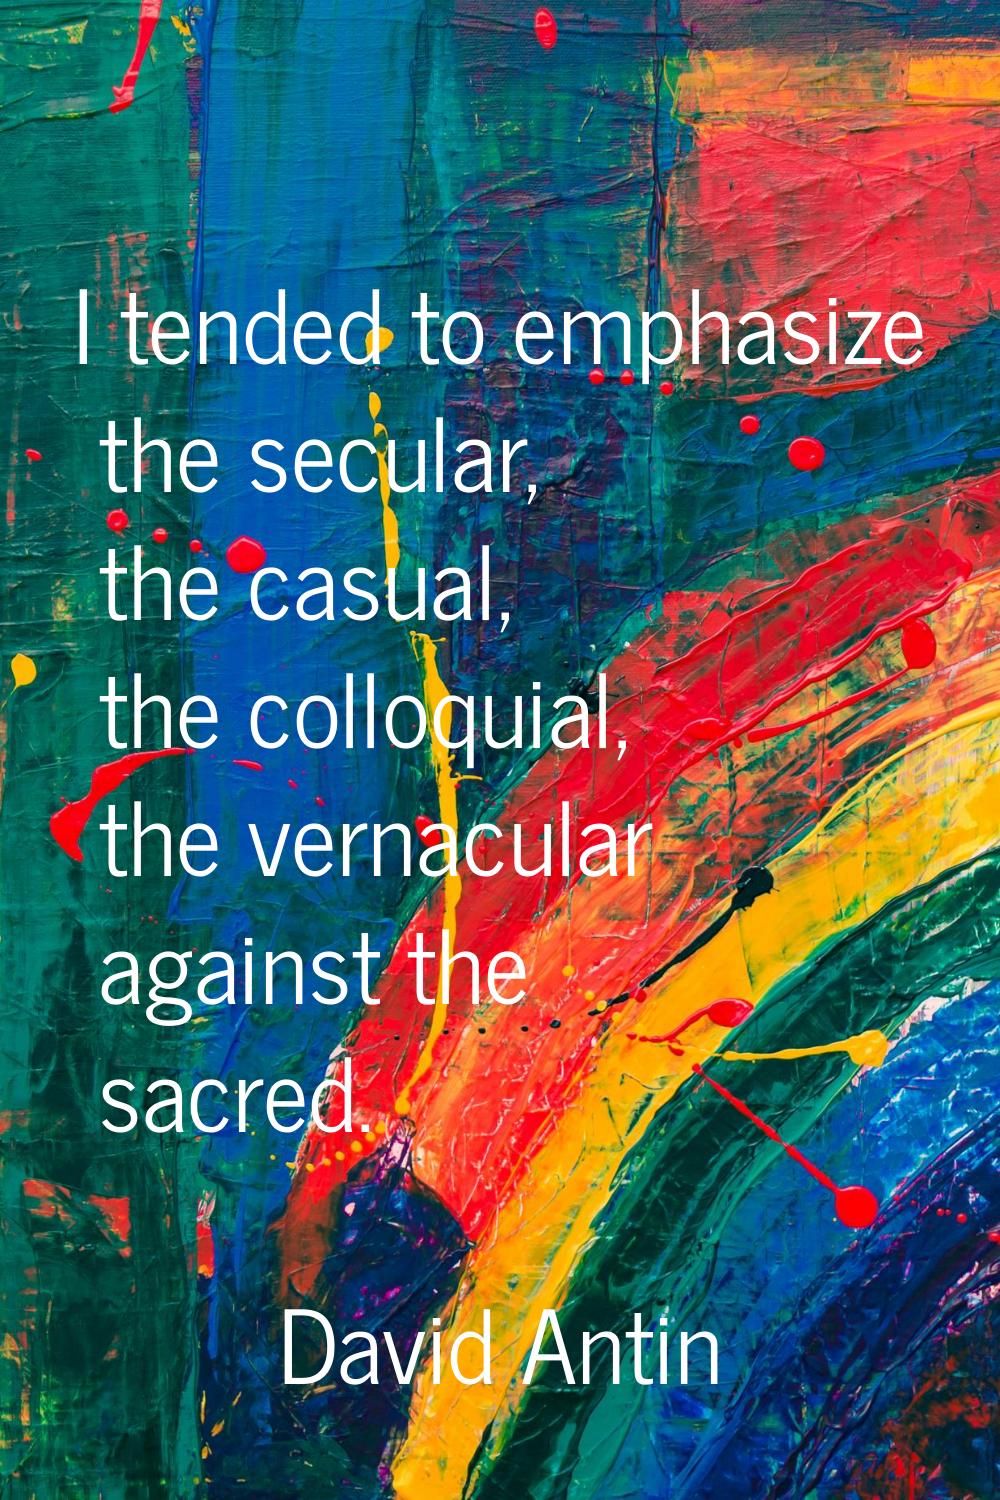 I tended to emphasize the secular, the casual, the colloquial, the vernacular against the sacred.